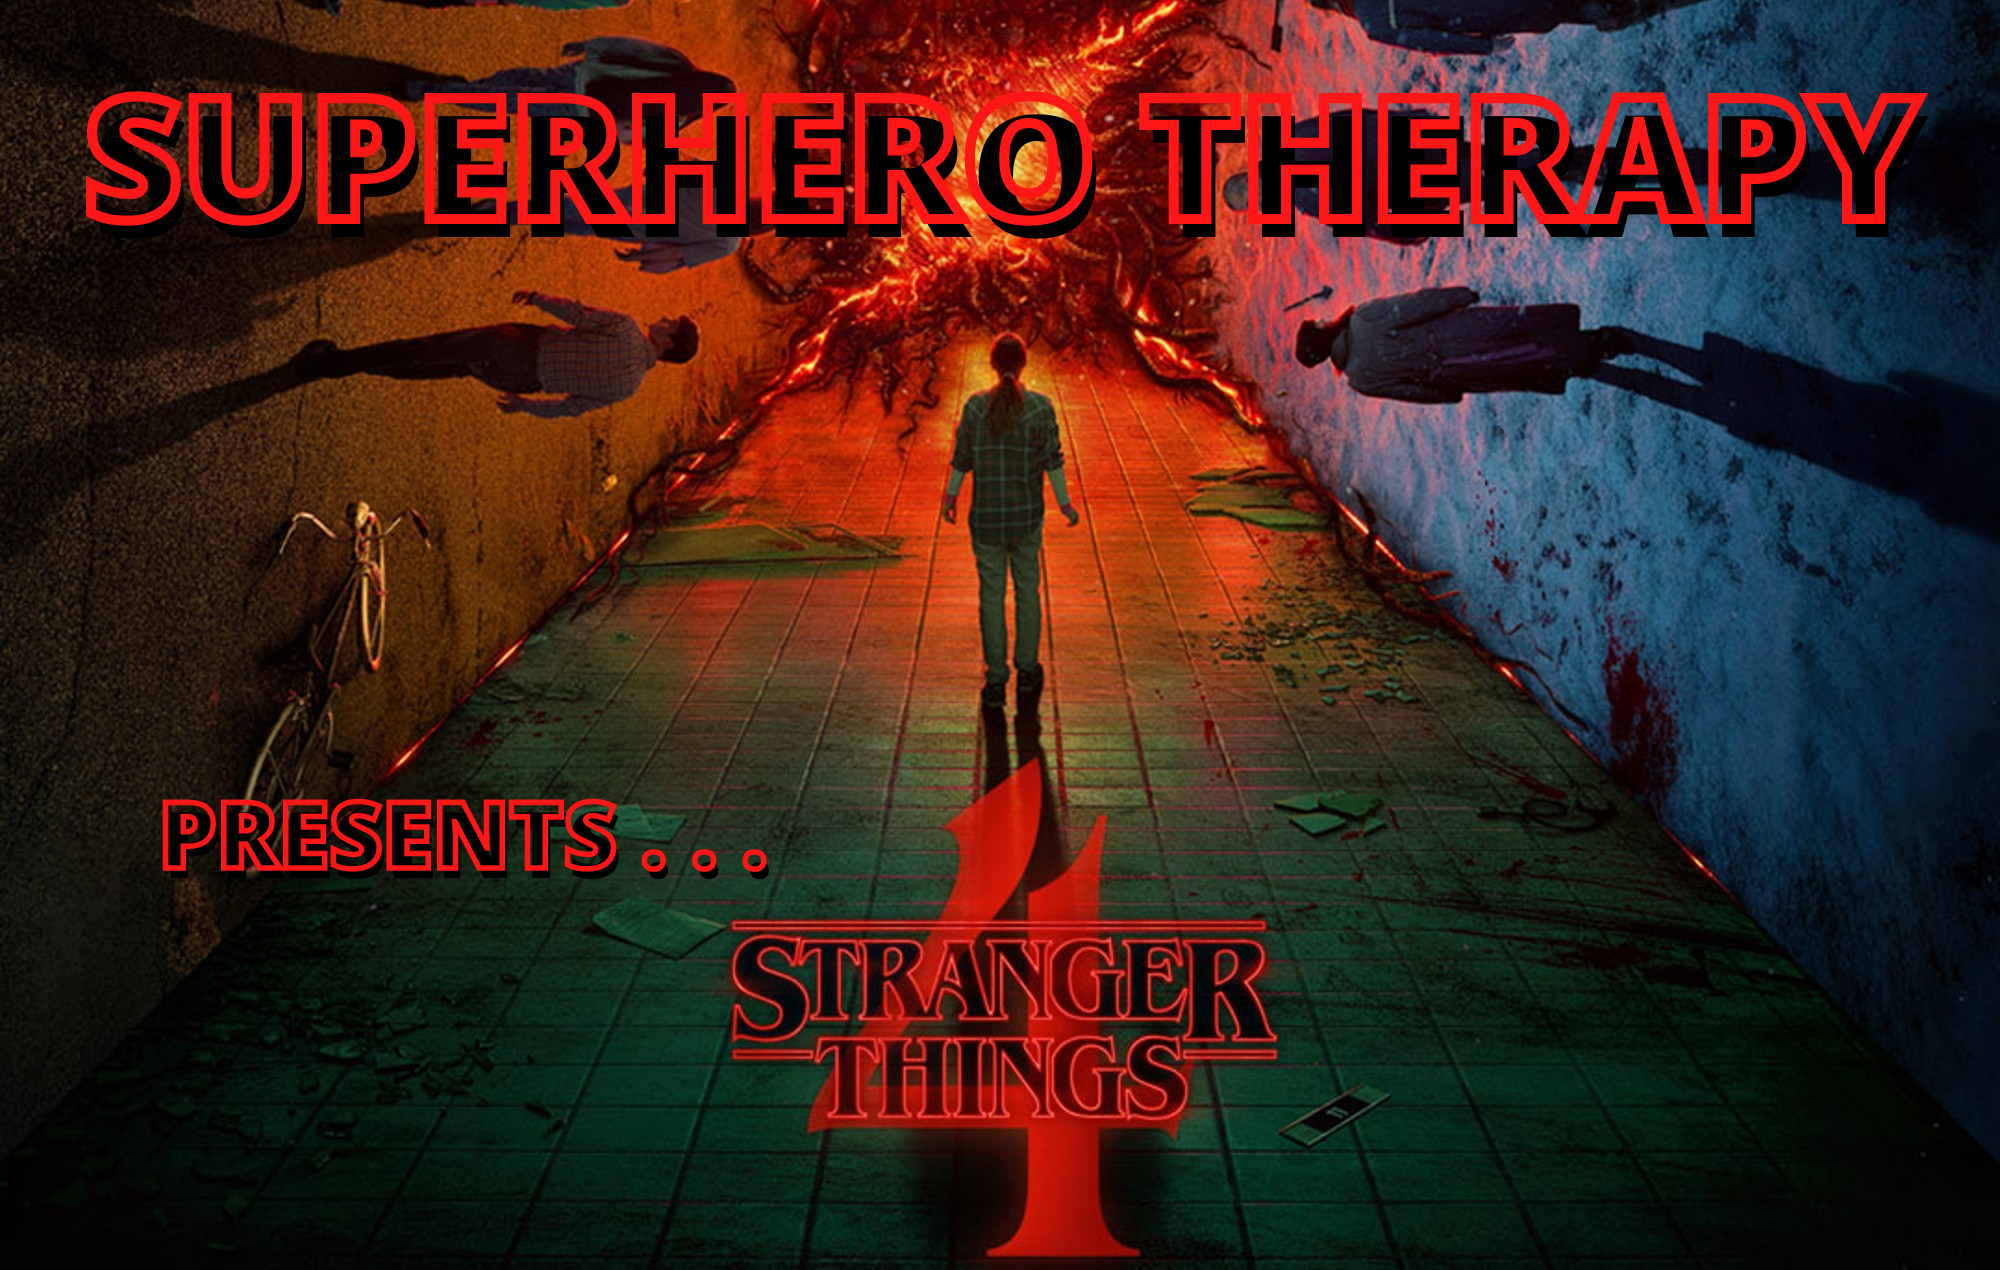 Superhero Therapy Podcast promo picture for: "Stranger Things 4"